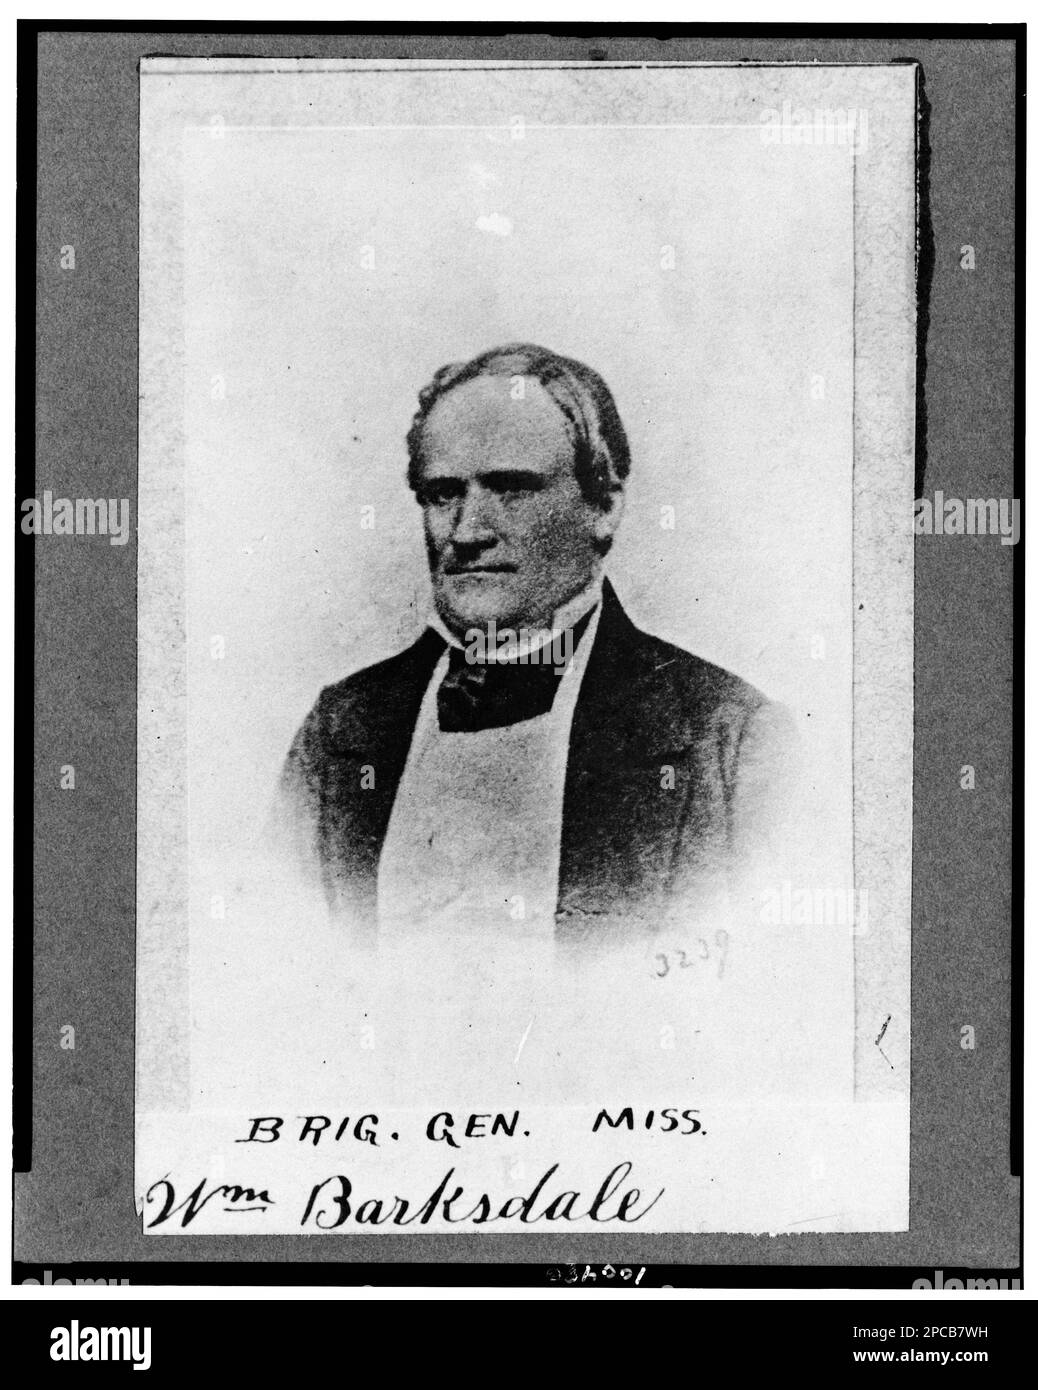 Wm. Barksdale. Brigadier General Miss.. From Brady negative. Barksdale, William, Military service, Generals, Confederate, 1860-1870, United States, History, Civil War, 1861-1865, Military personnel, Confederate. Stock Photo